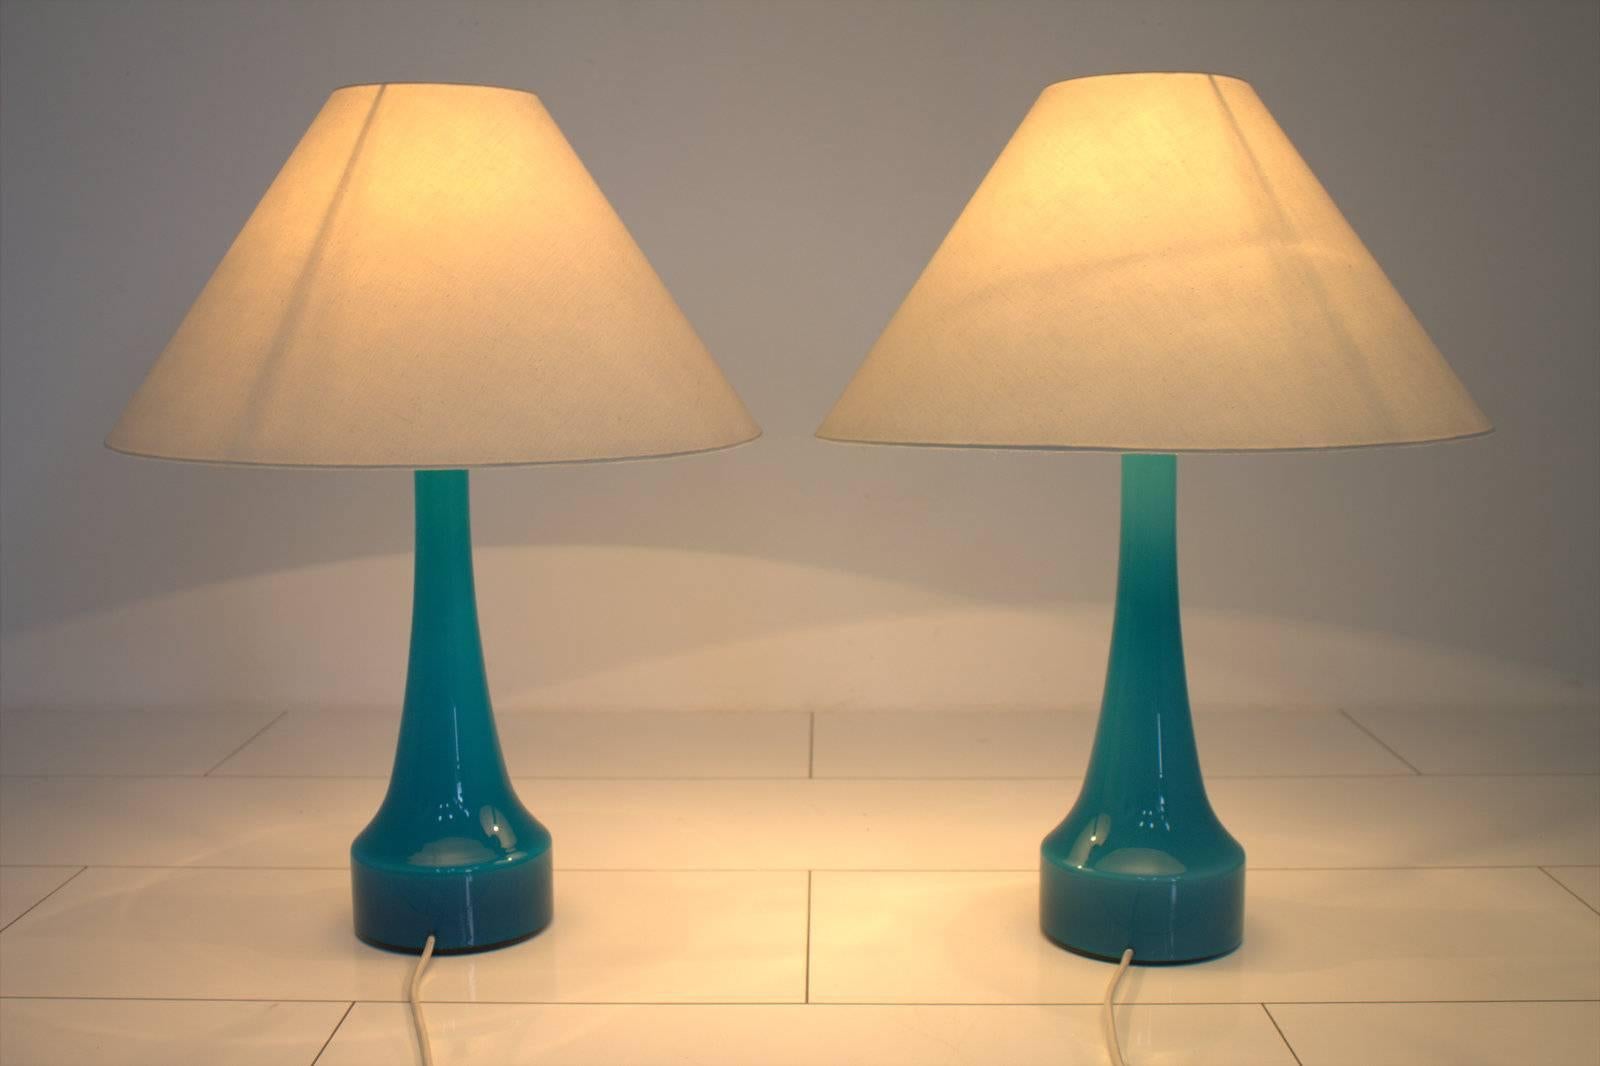 Nice pair of blue glass table lamps by Holmegaard, Denmark circa 1960s. Original shades. 
Very good original condition.

Worldwide shipping.

